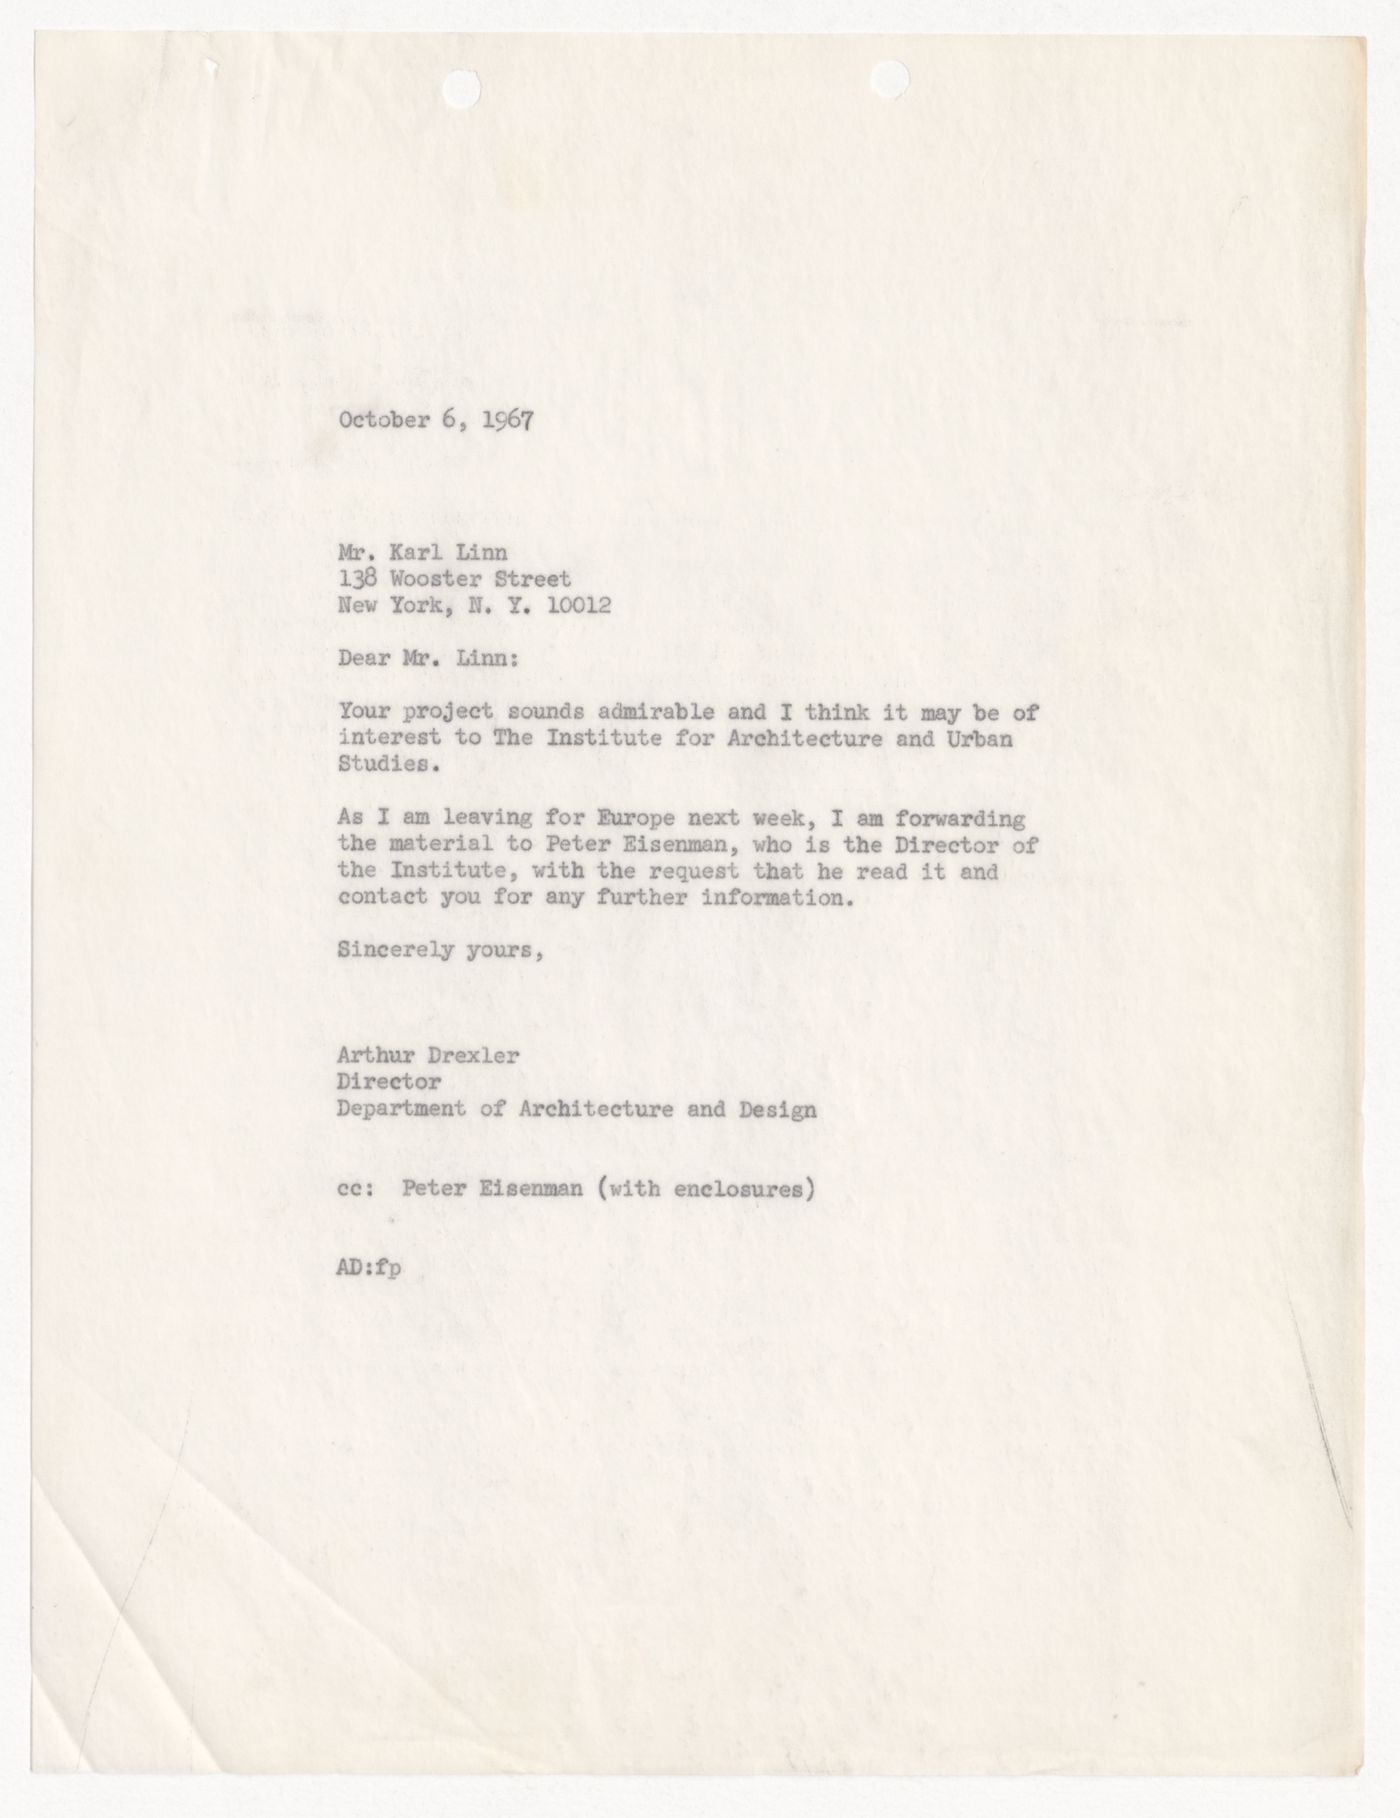 Letter from Arthur Drexler to Karl Linn about IAUS support for Linn's project